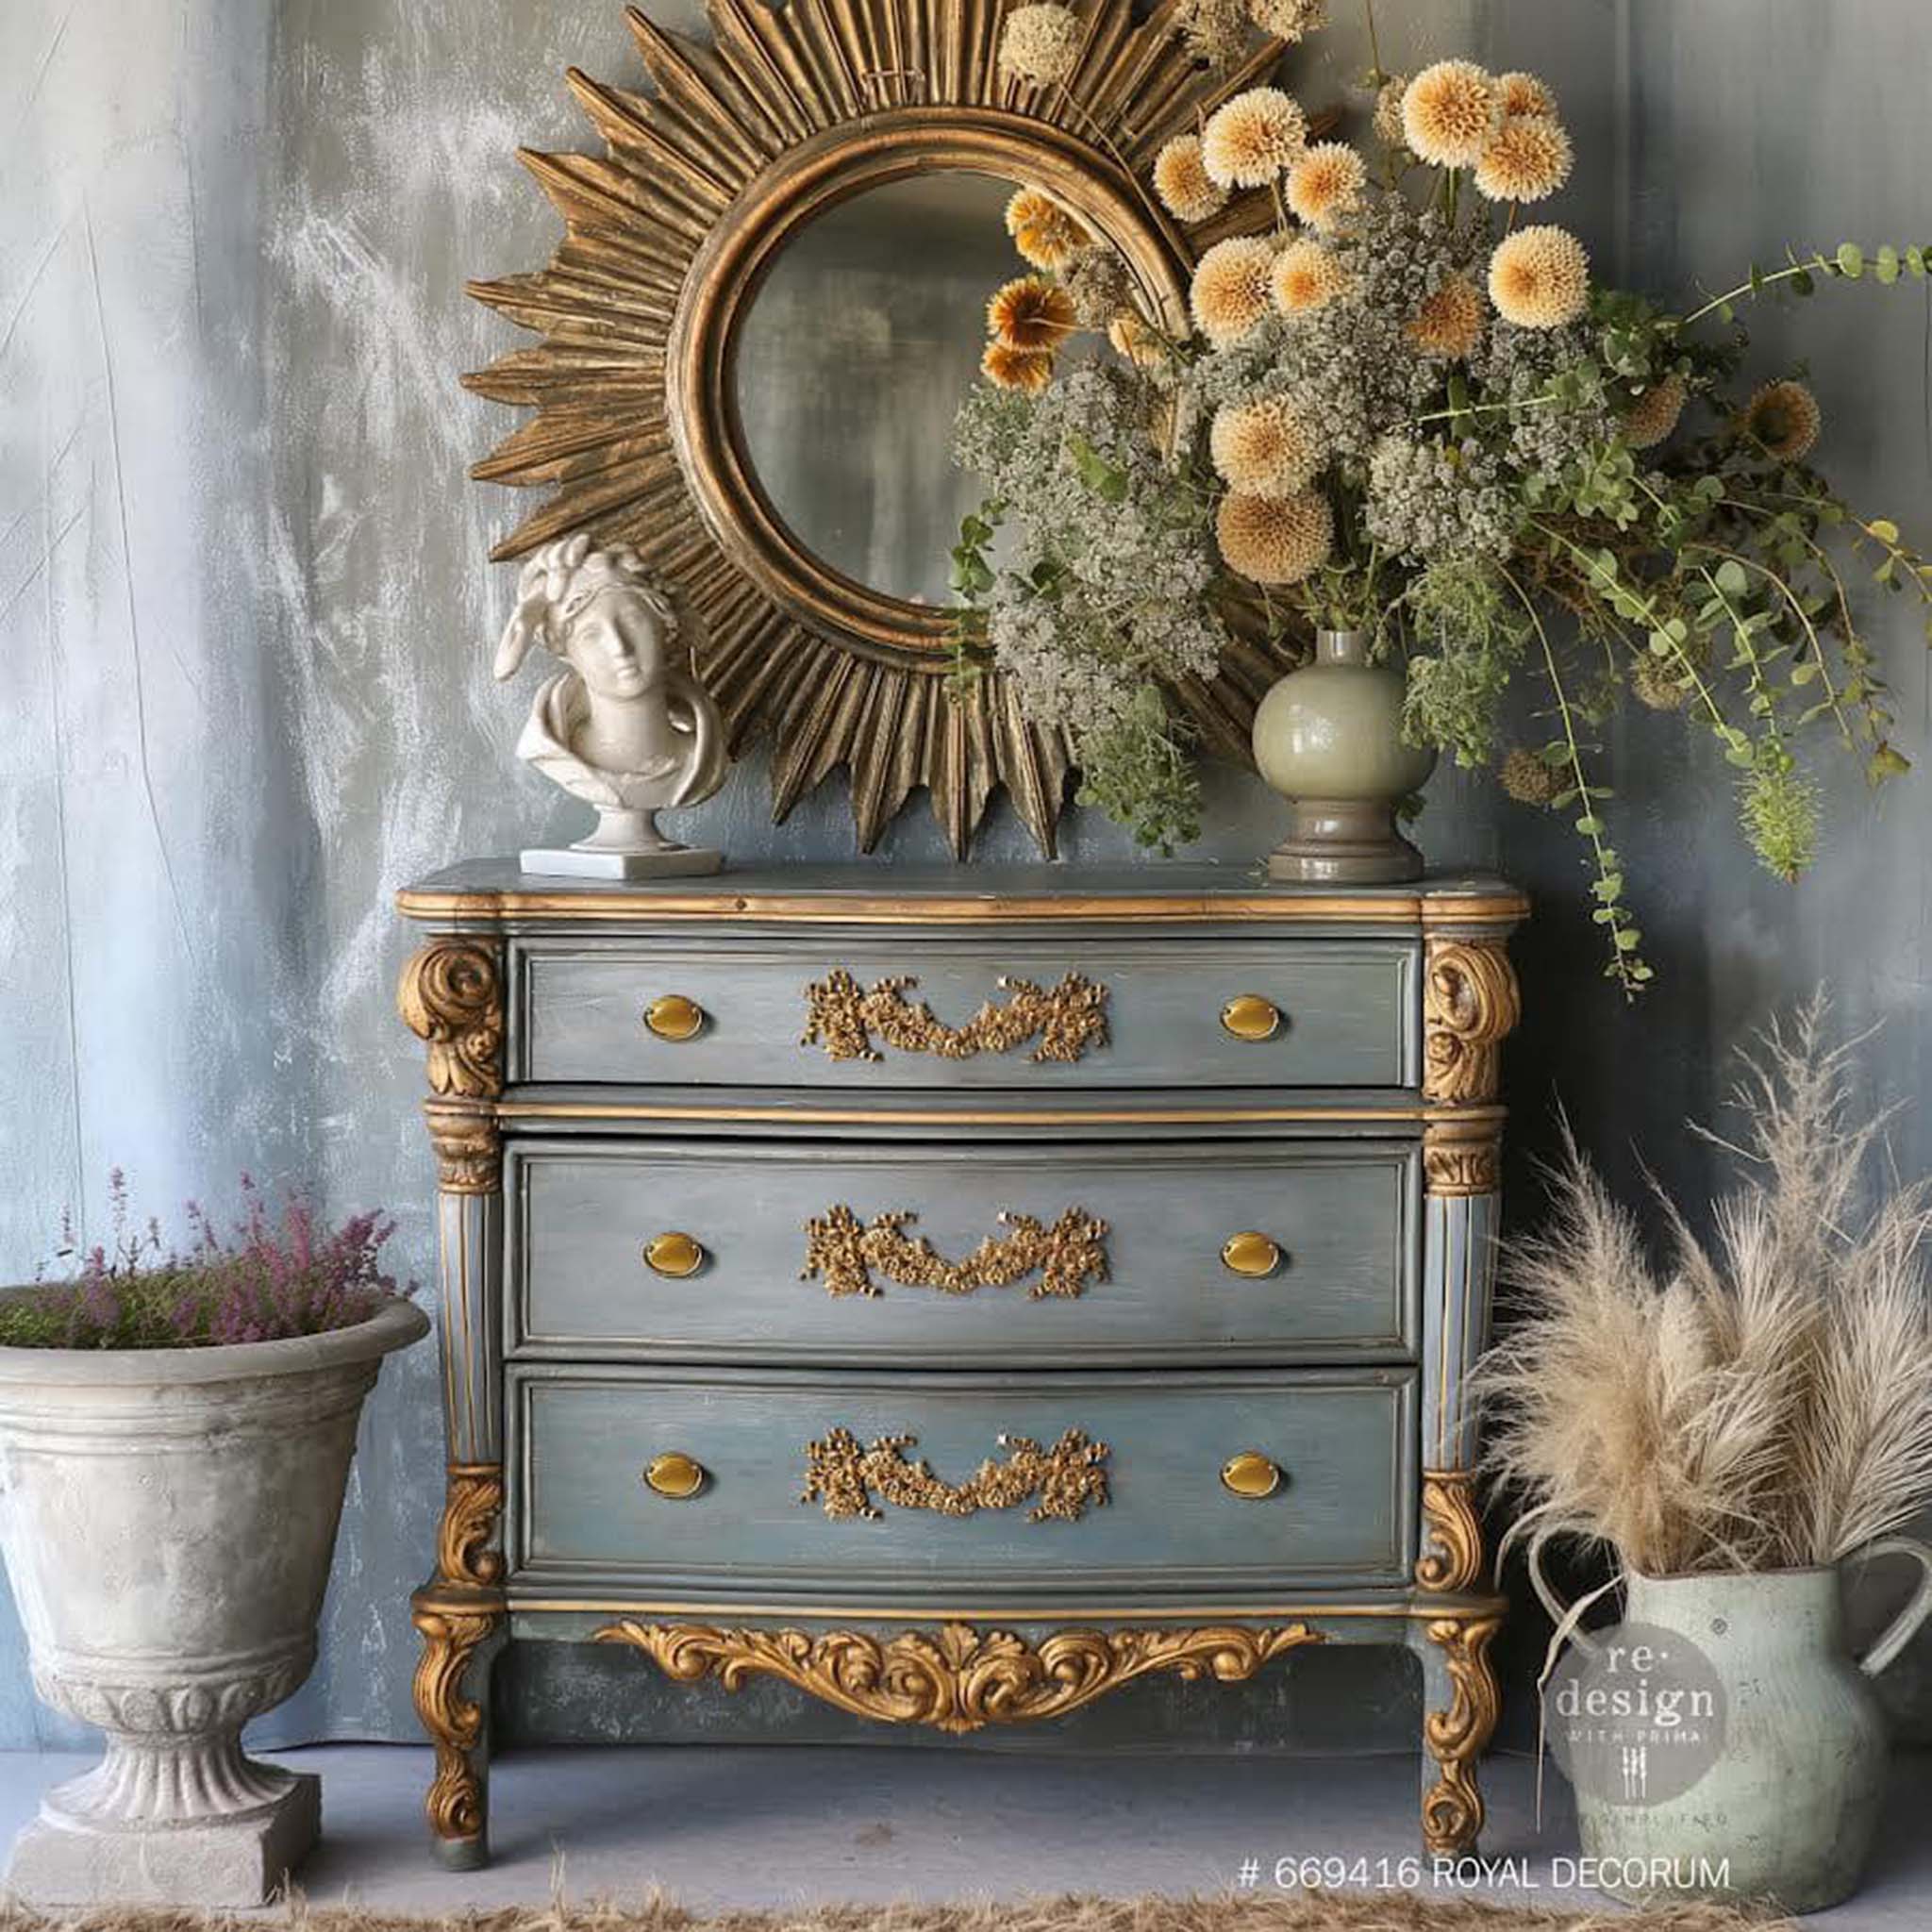 A vintage 3-drawer dresser is painted gray with gold accents and features ReDesign with Prima's Royal Decor Poly Casting in the center of the drawers.